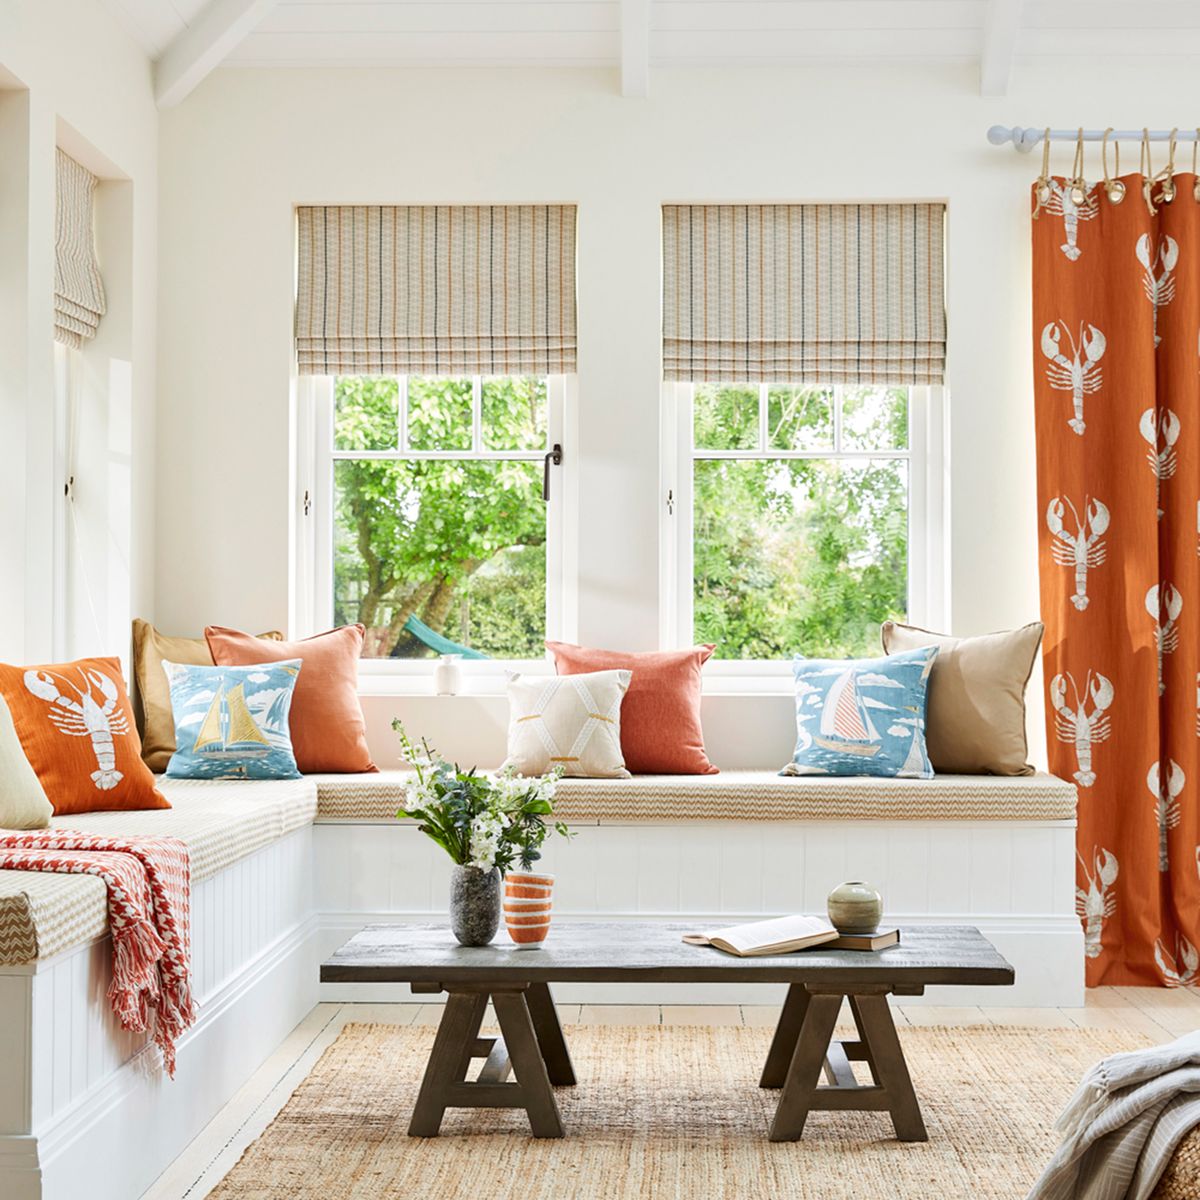 Crustaceancore is summer’s next big trend - here’s how to add it to your home